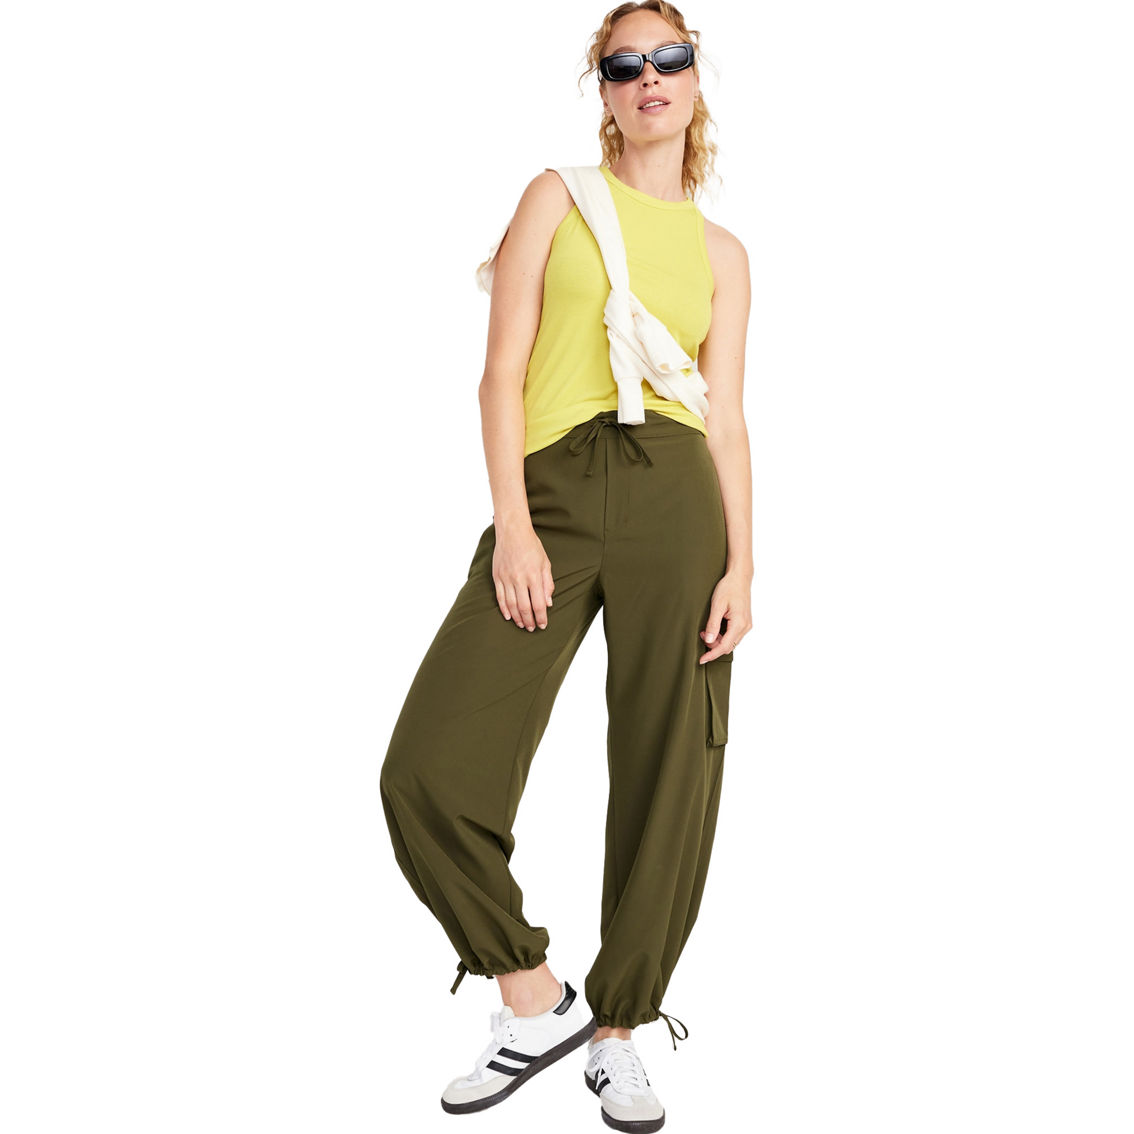 Old Navy StretchTech High Waisted Adjustable Cargo Pants - Image 2 of 3